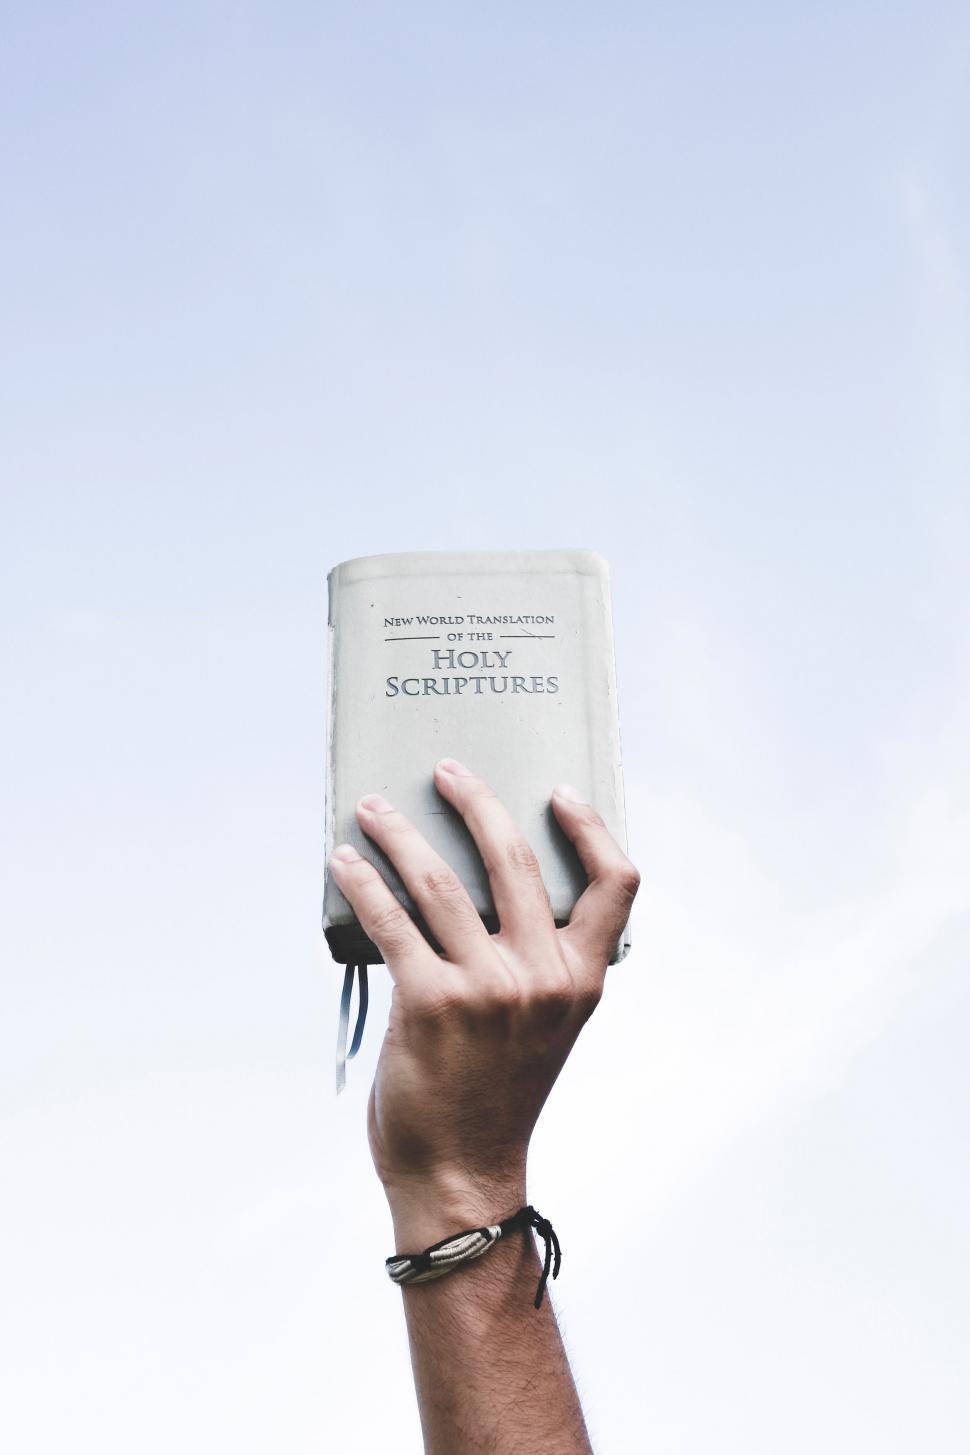 Free Image of Person Holding Up a Book in the Air 